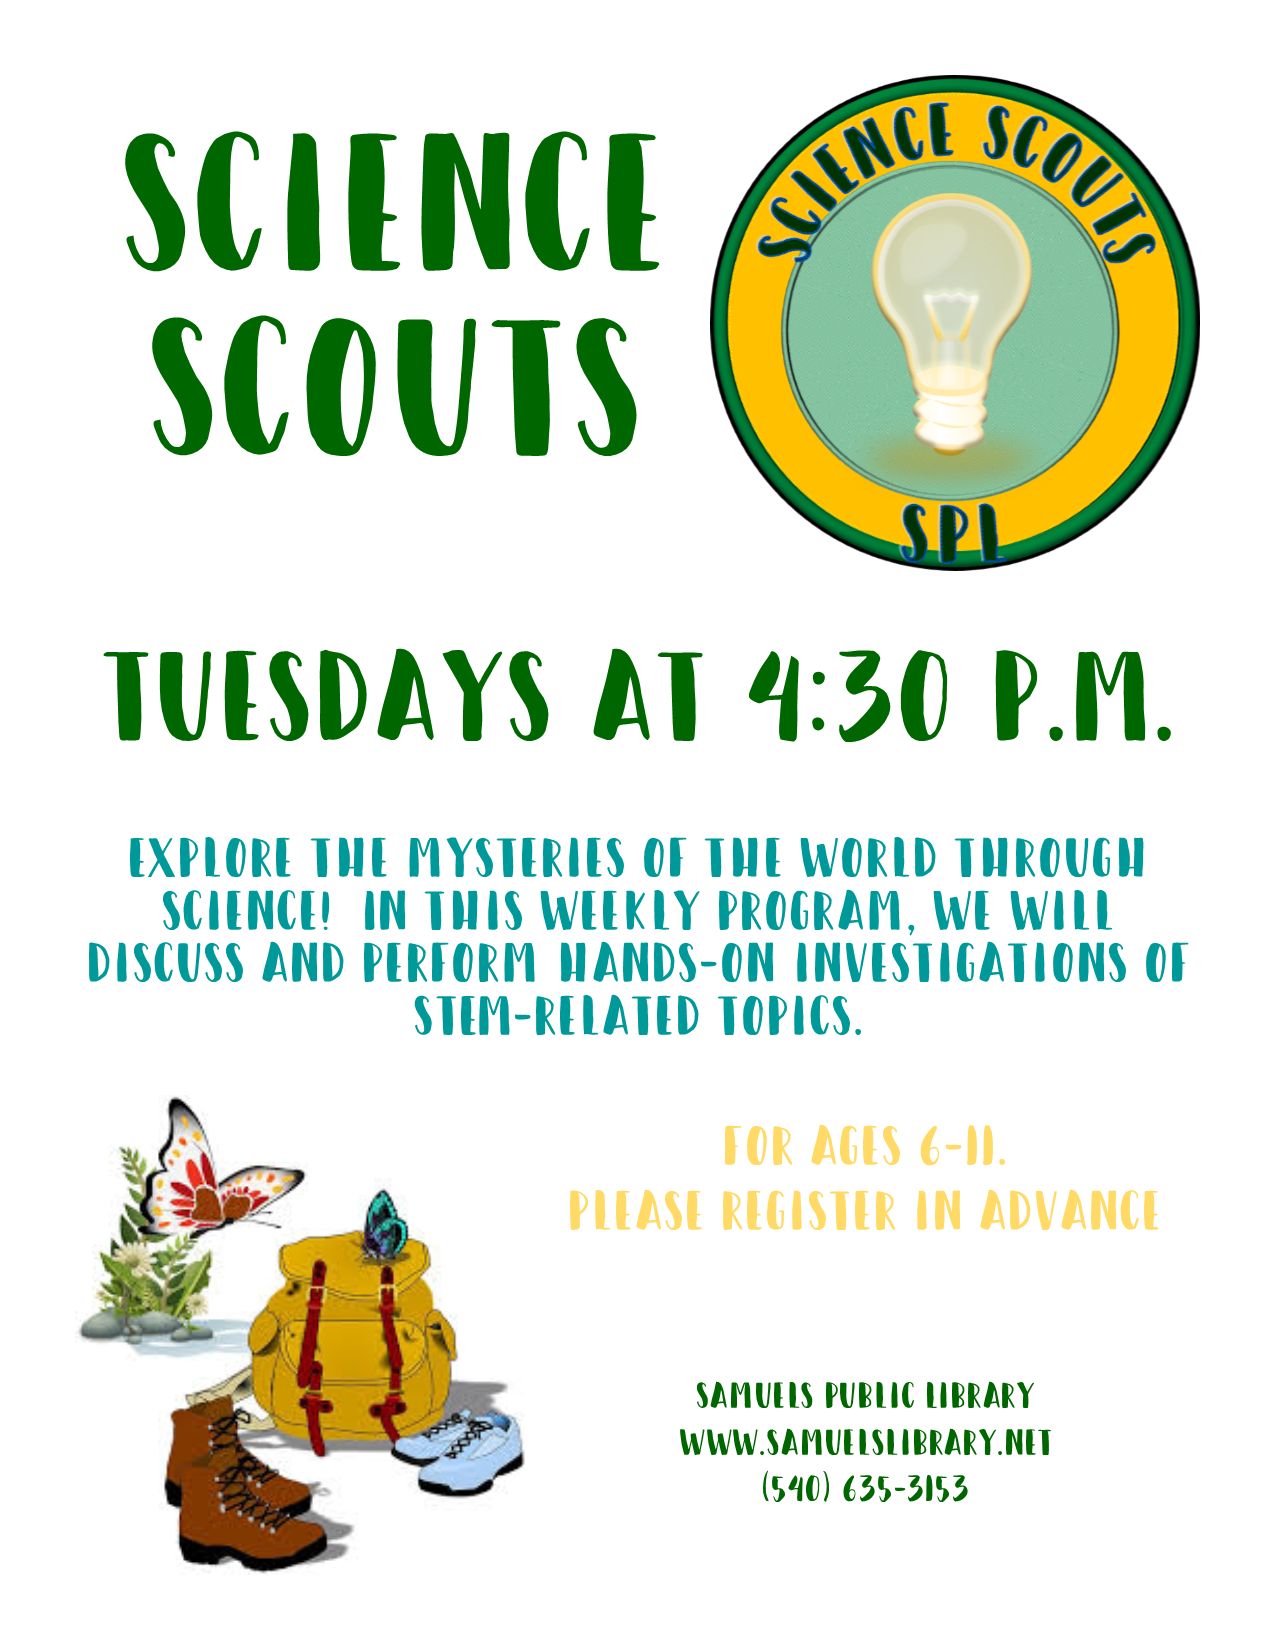 Science Scouts for children aged 6-11.